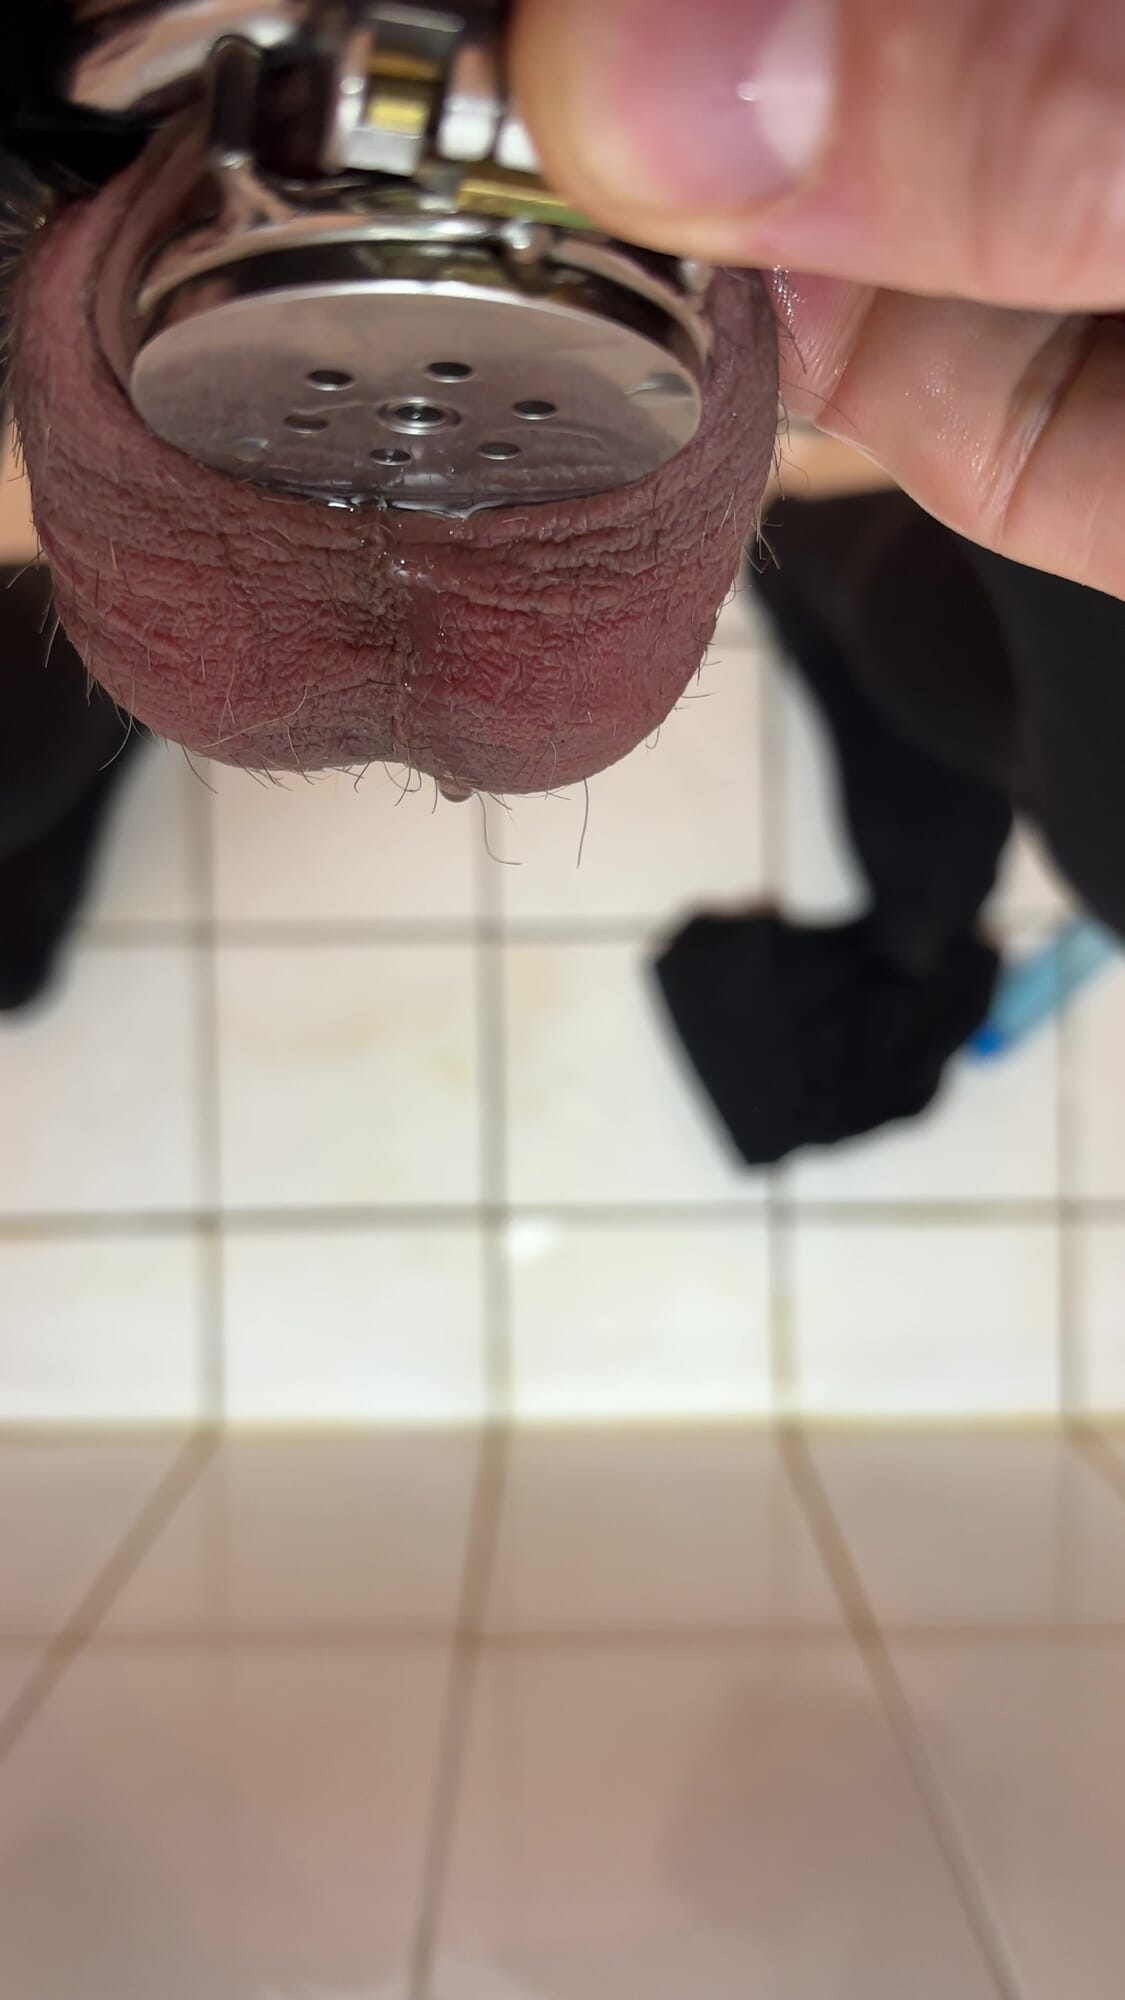 pissing in micro chastity cage snapshot 1